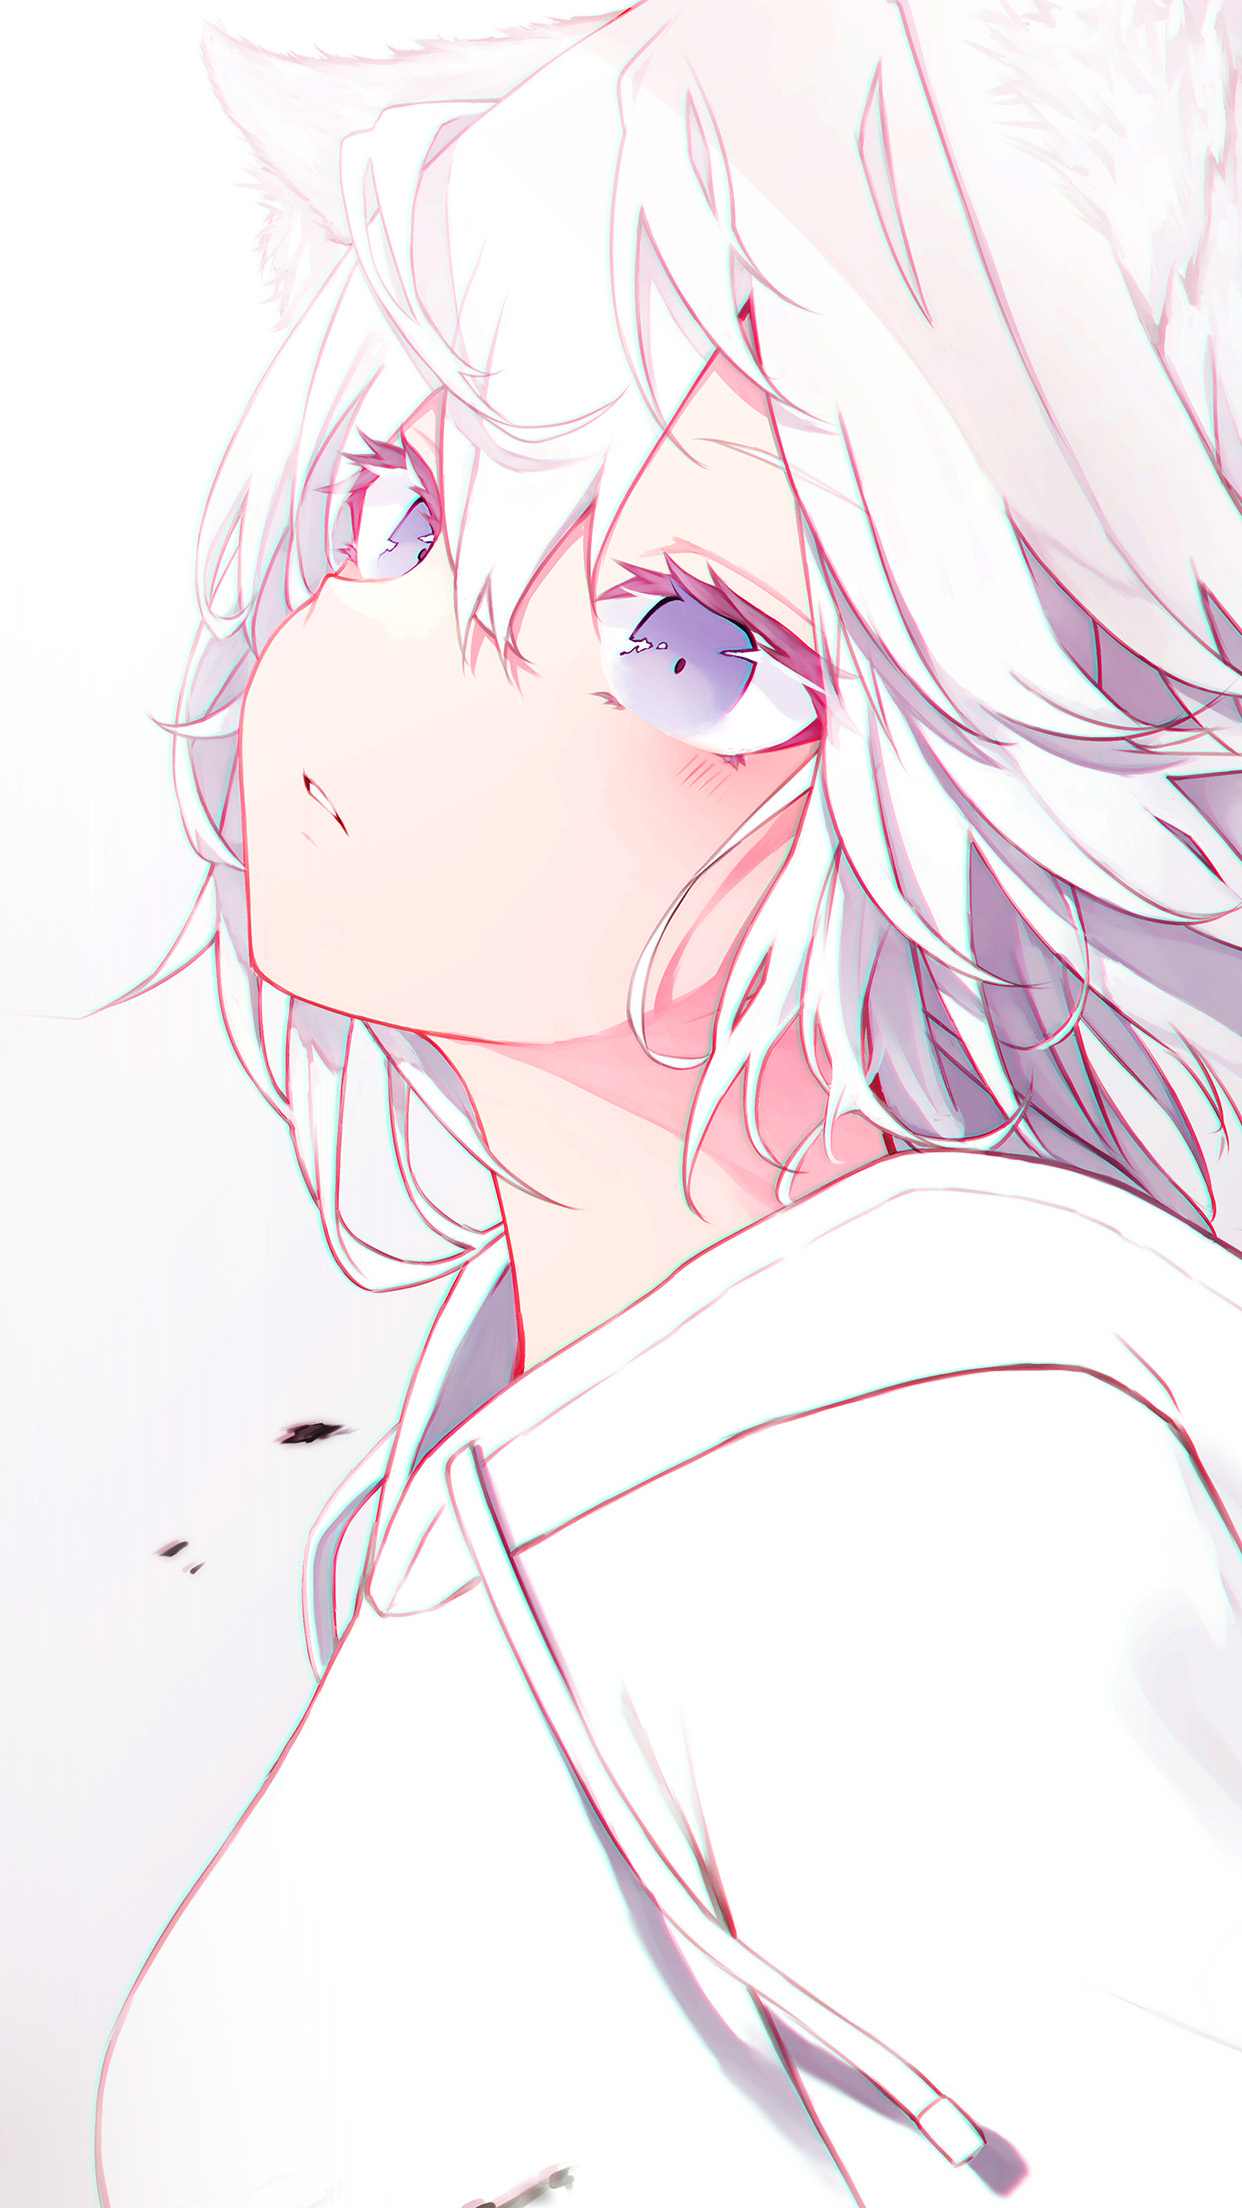 A picture of a anime boy with white hair and a white shirt - Anime girl